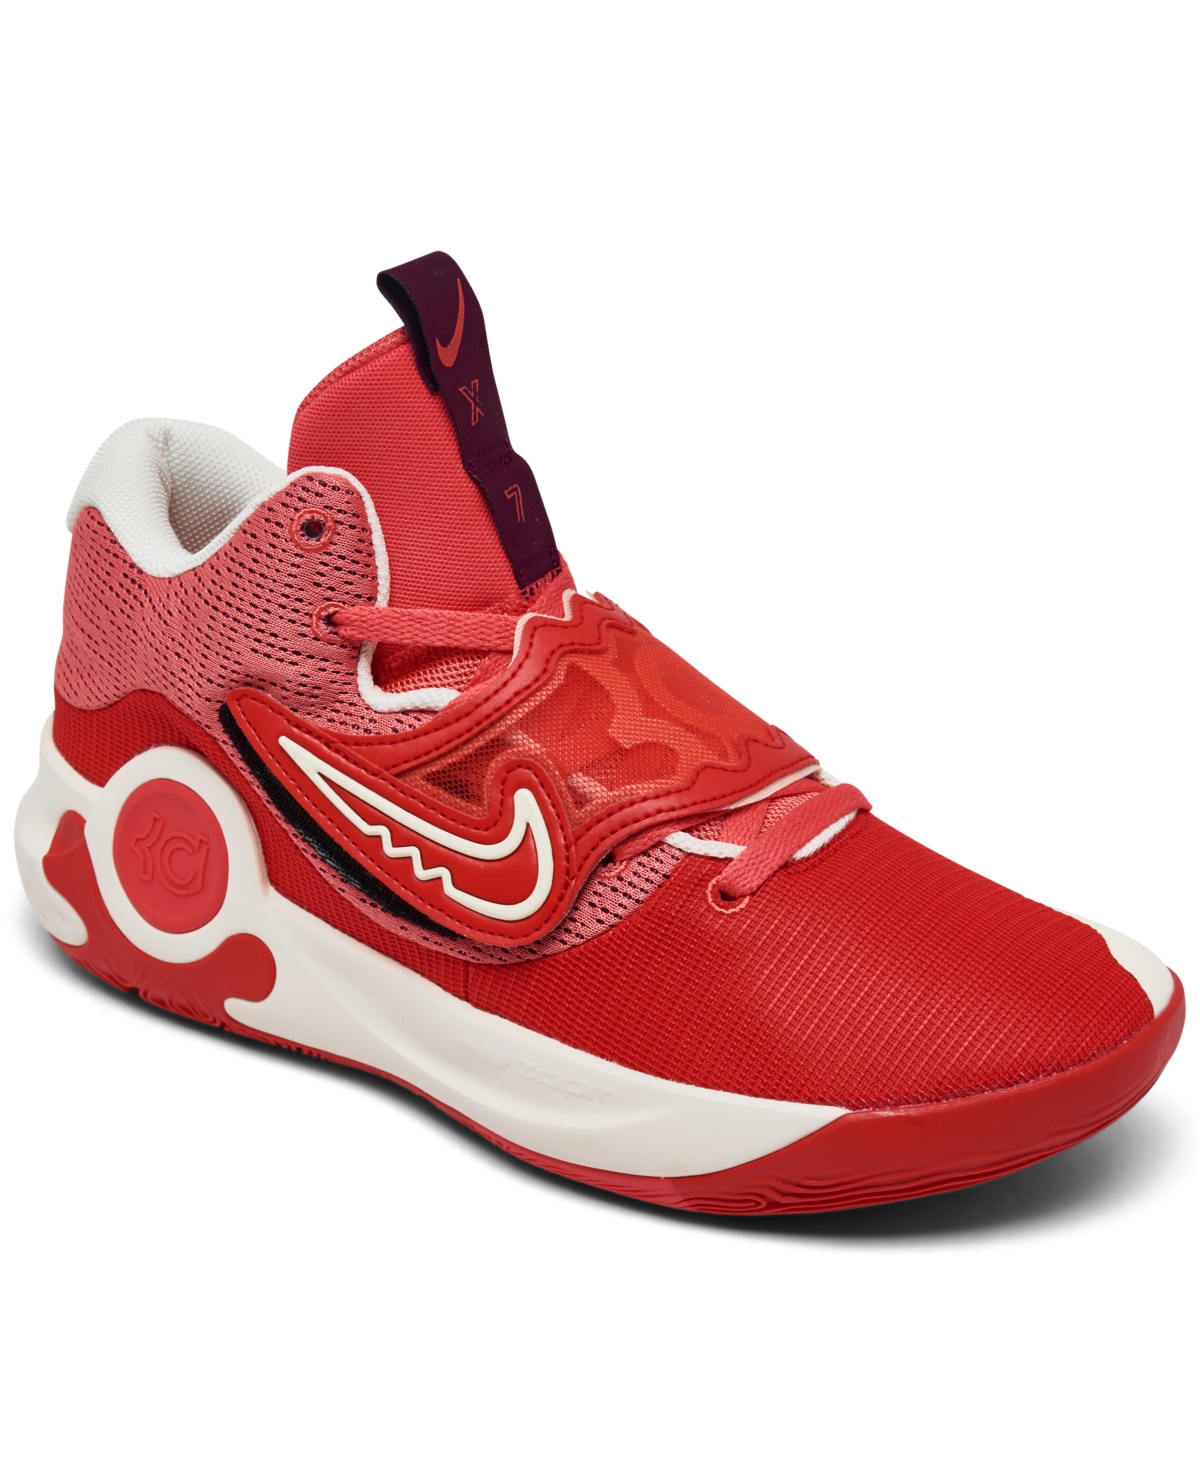 NIKE MEN'S KD TREY 5 X BASKETBALL SNEAKERS FROM FINISH LINE